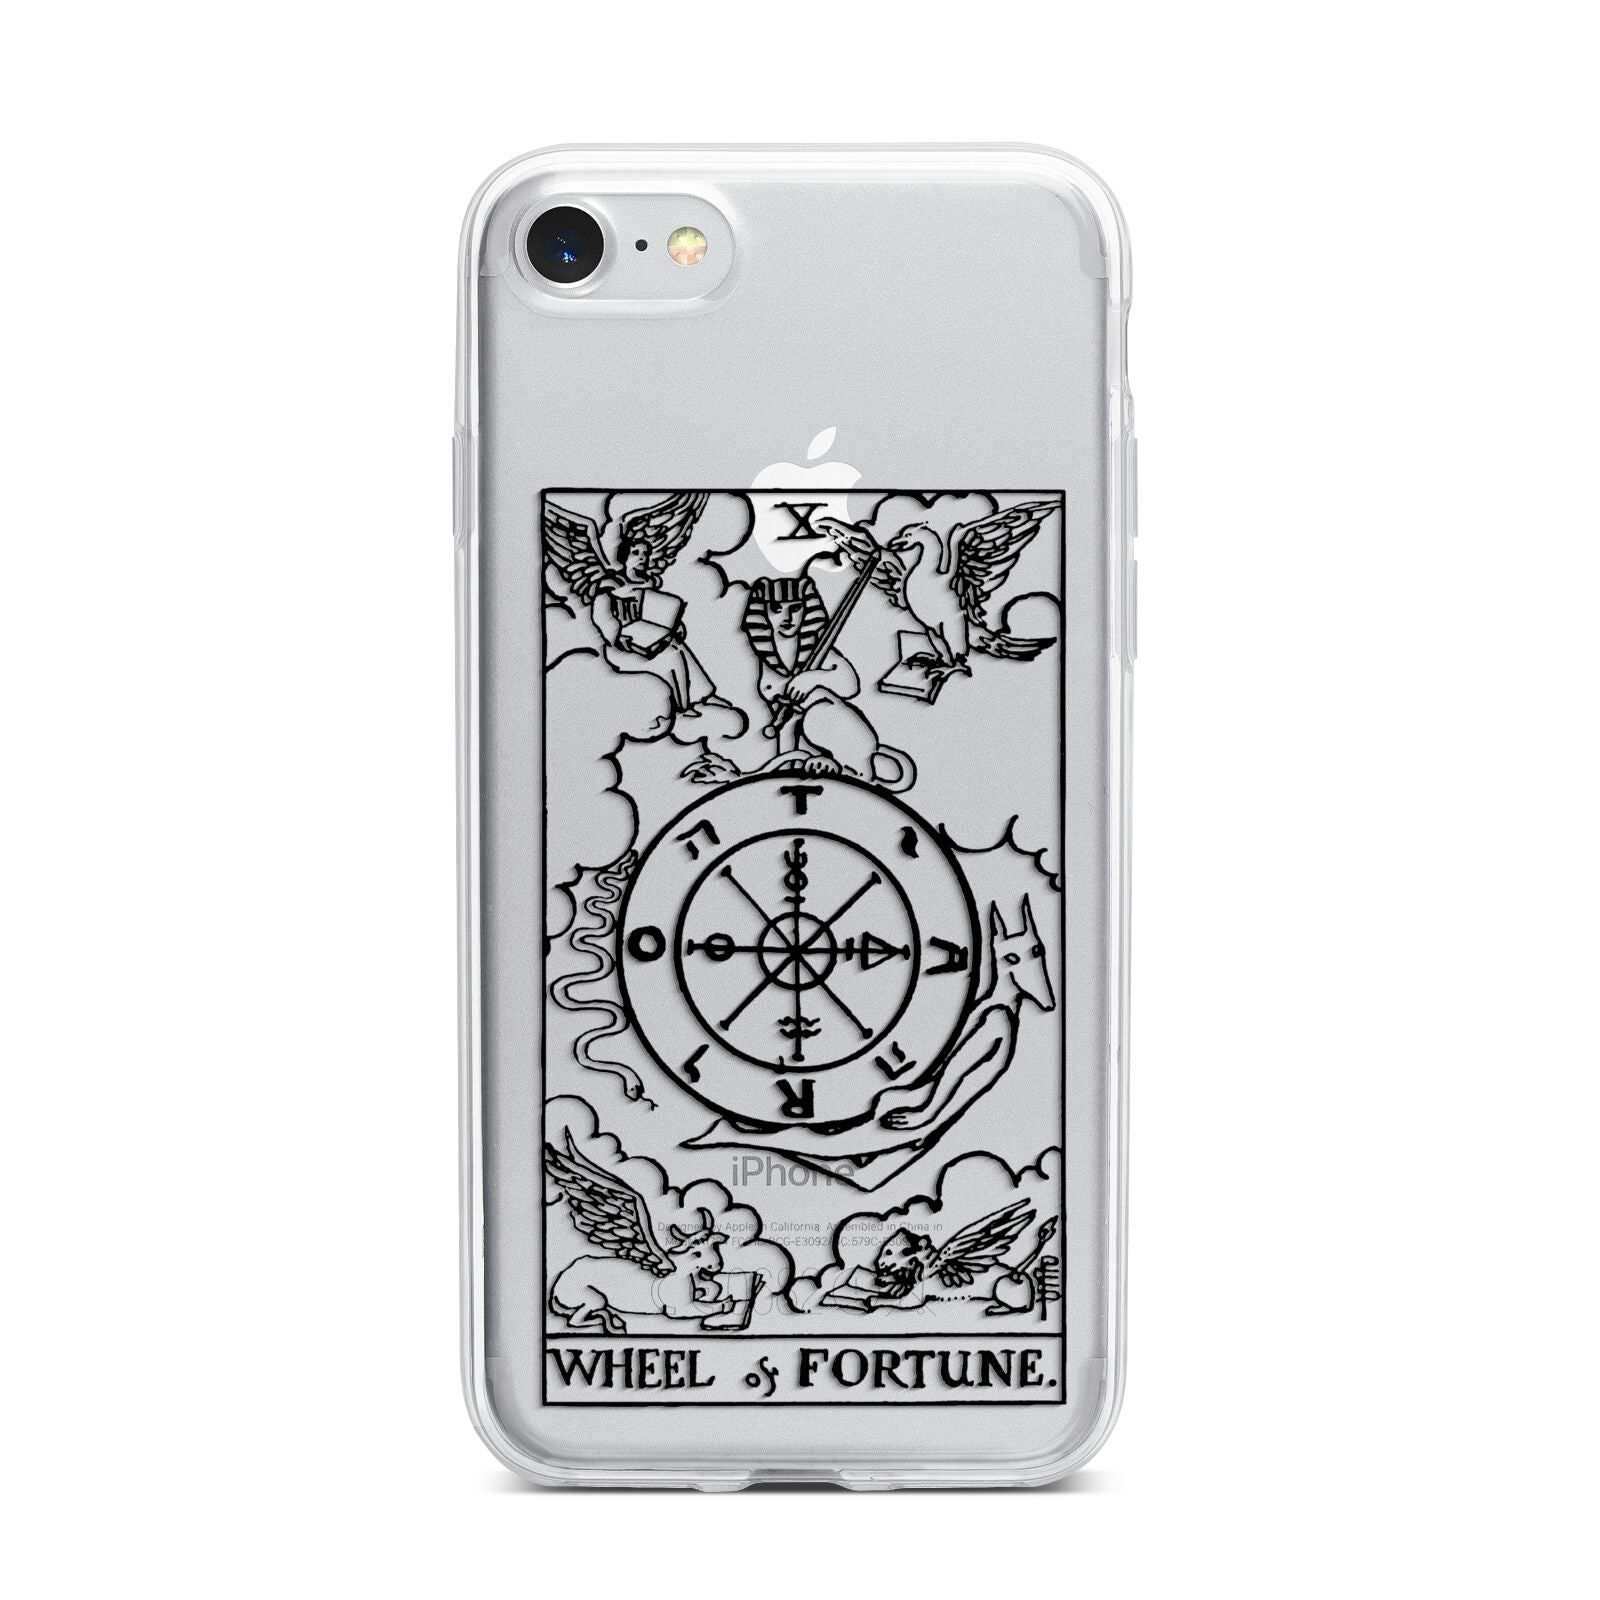 Wheel of Fortune Monochrome Tarot Card iPhone 7 Bumper Case on Silver iPhone